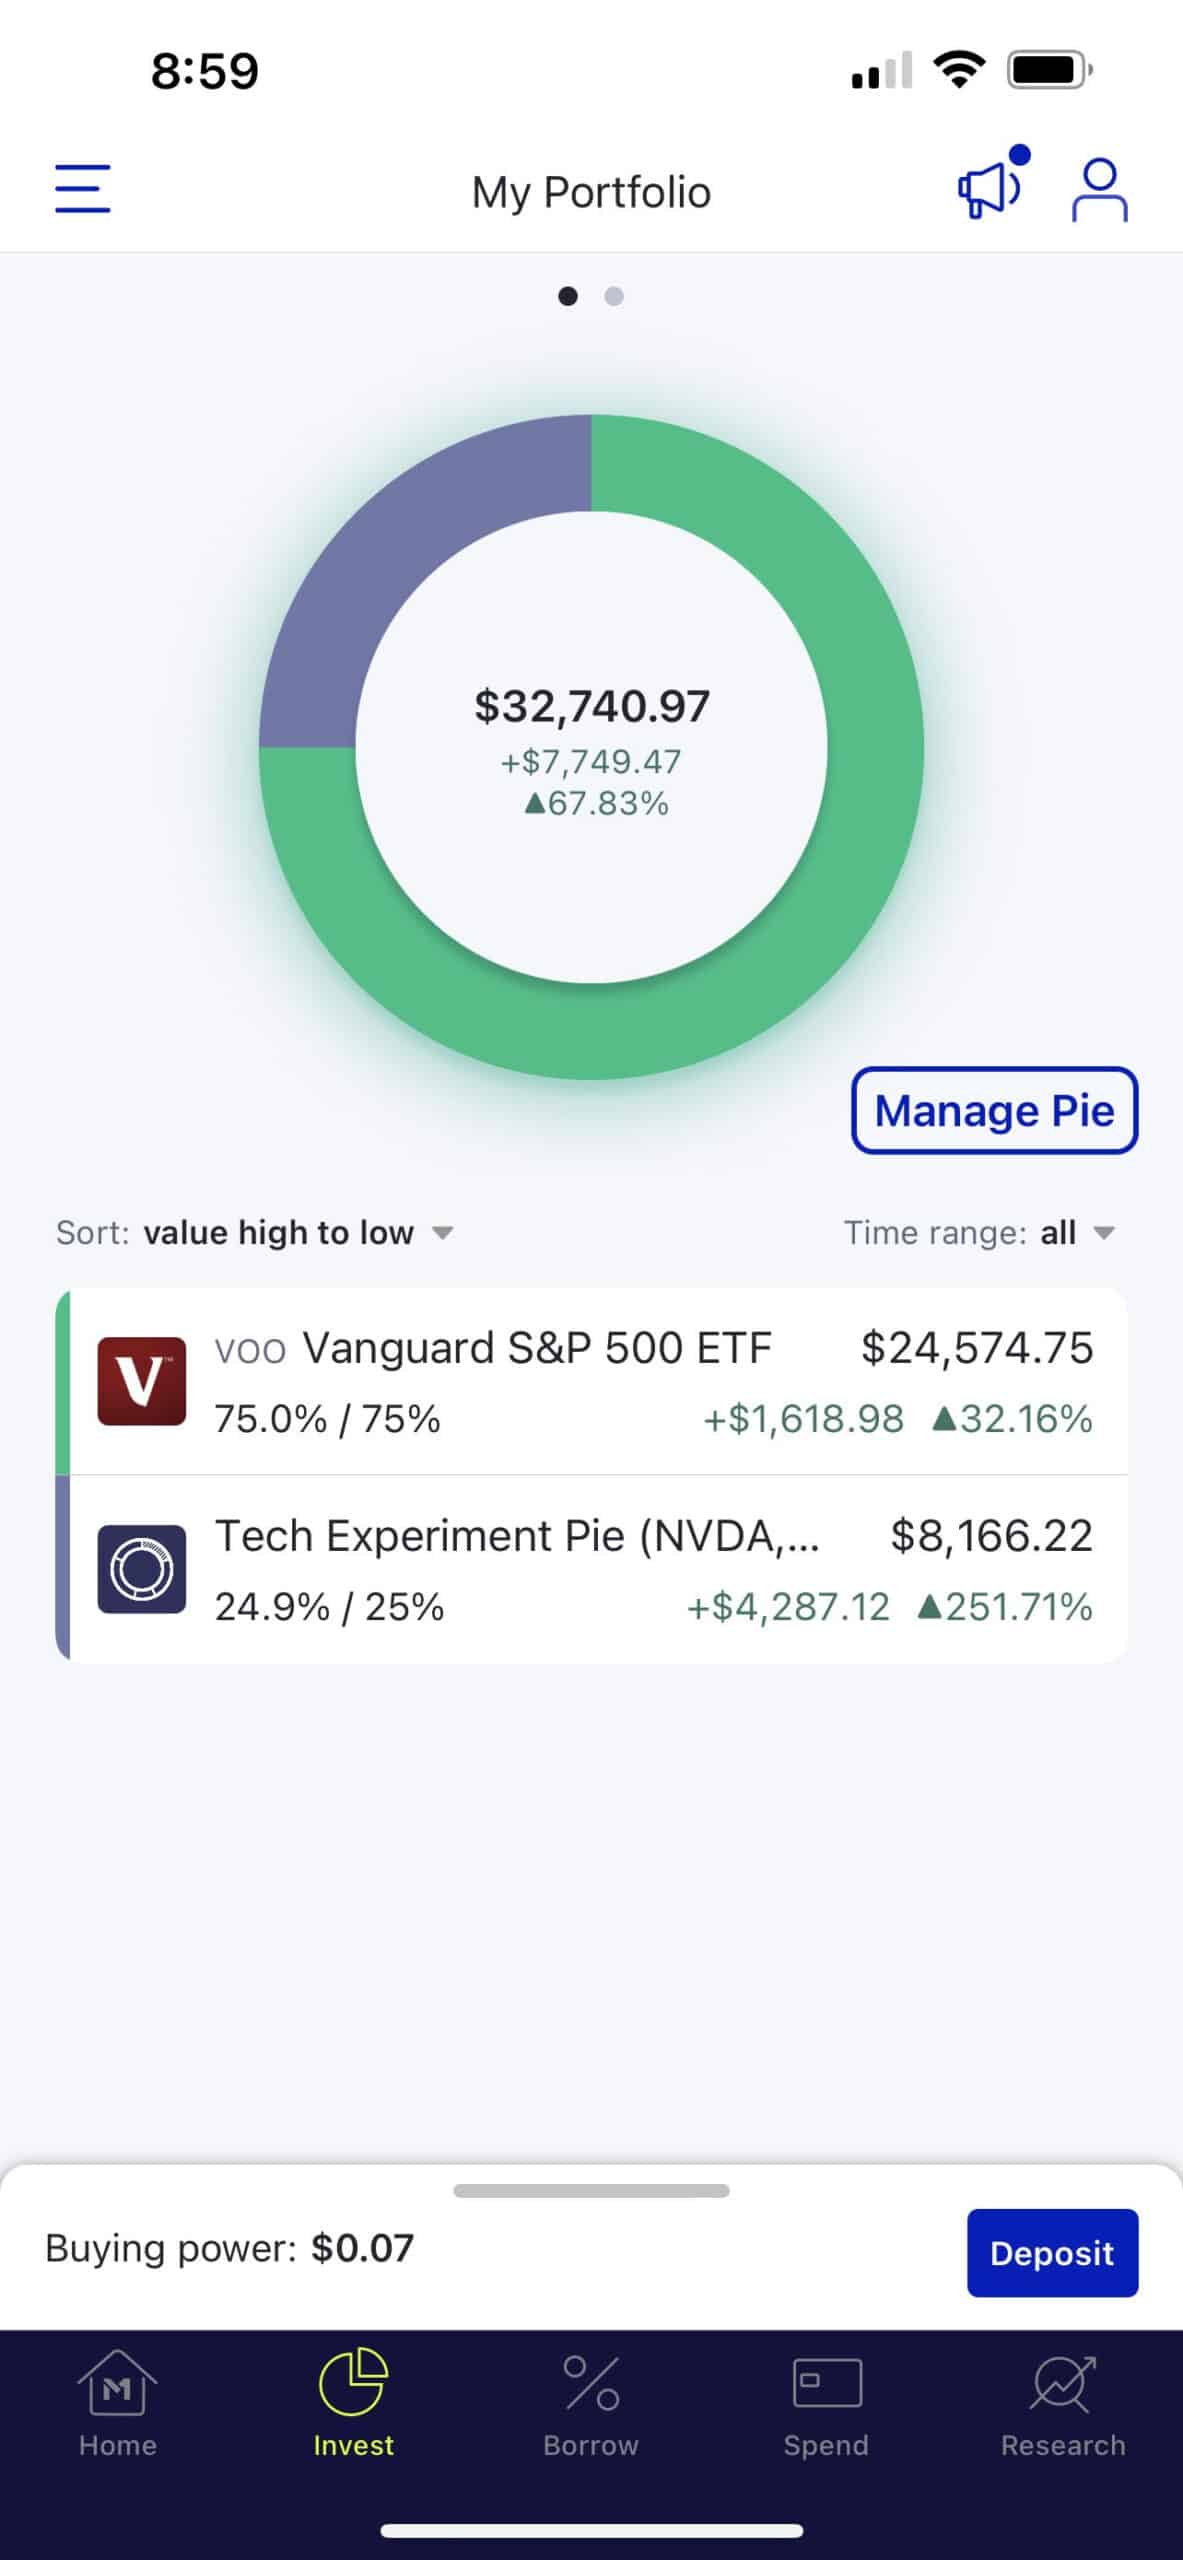 Snapshot of my investment pies in M1 finance